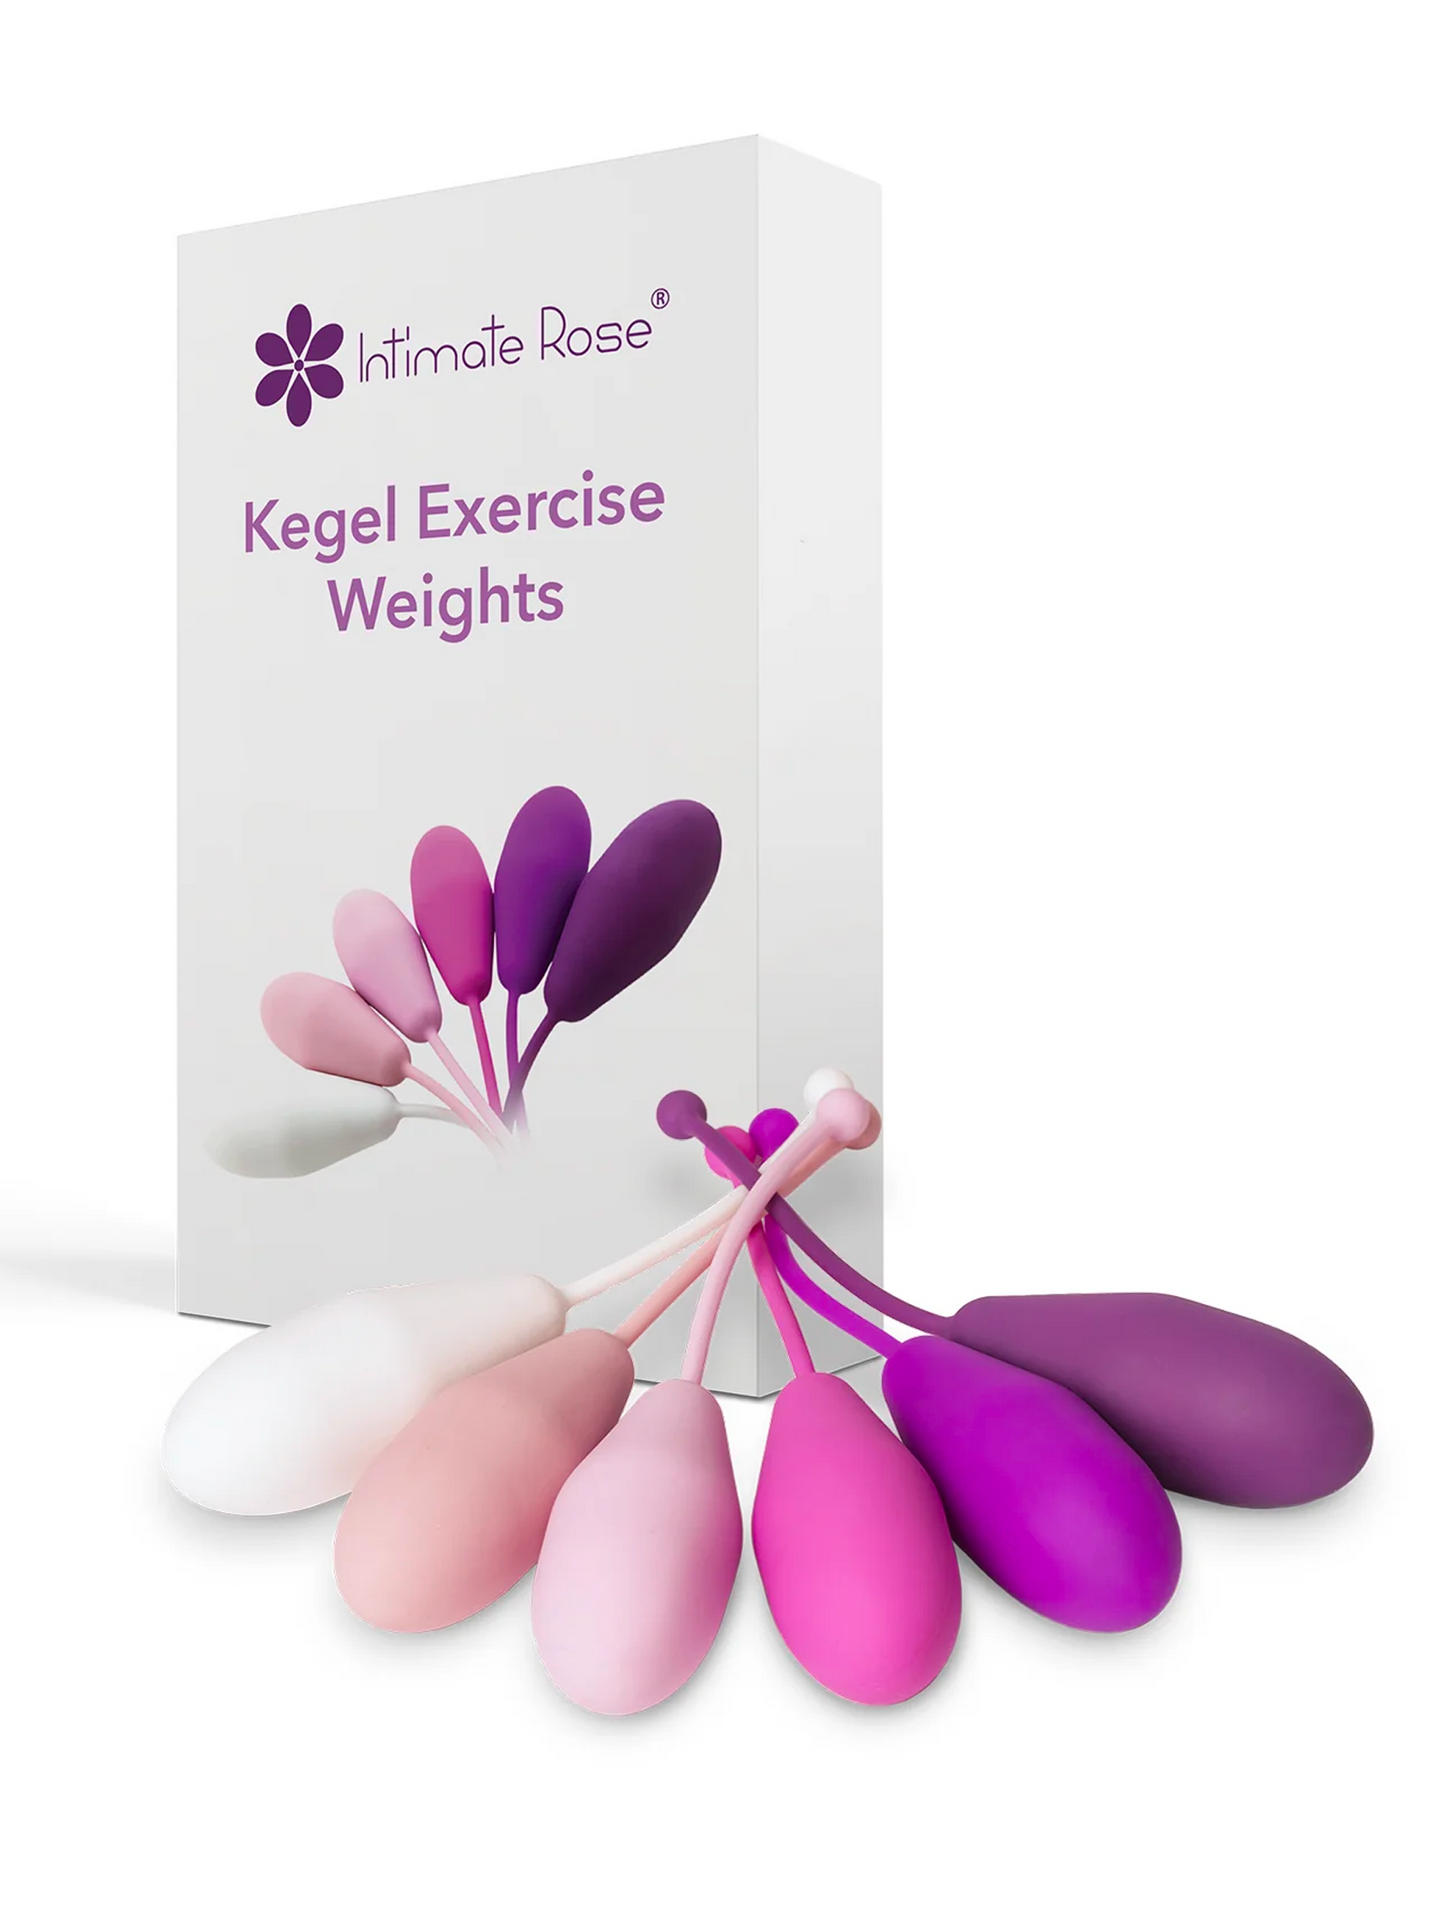 IntimateRose Kegel Exercise Weights with box